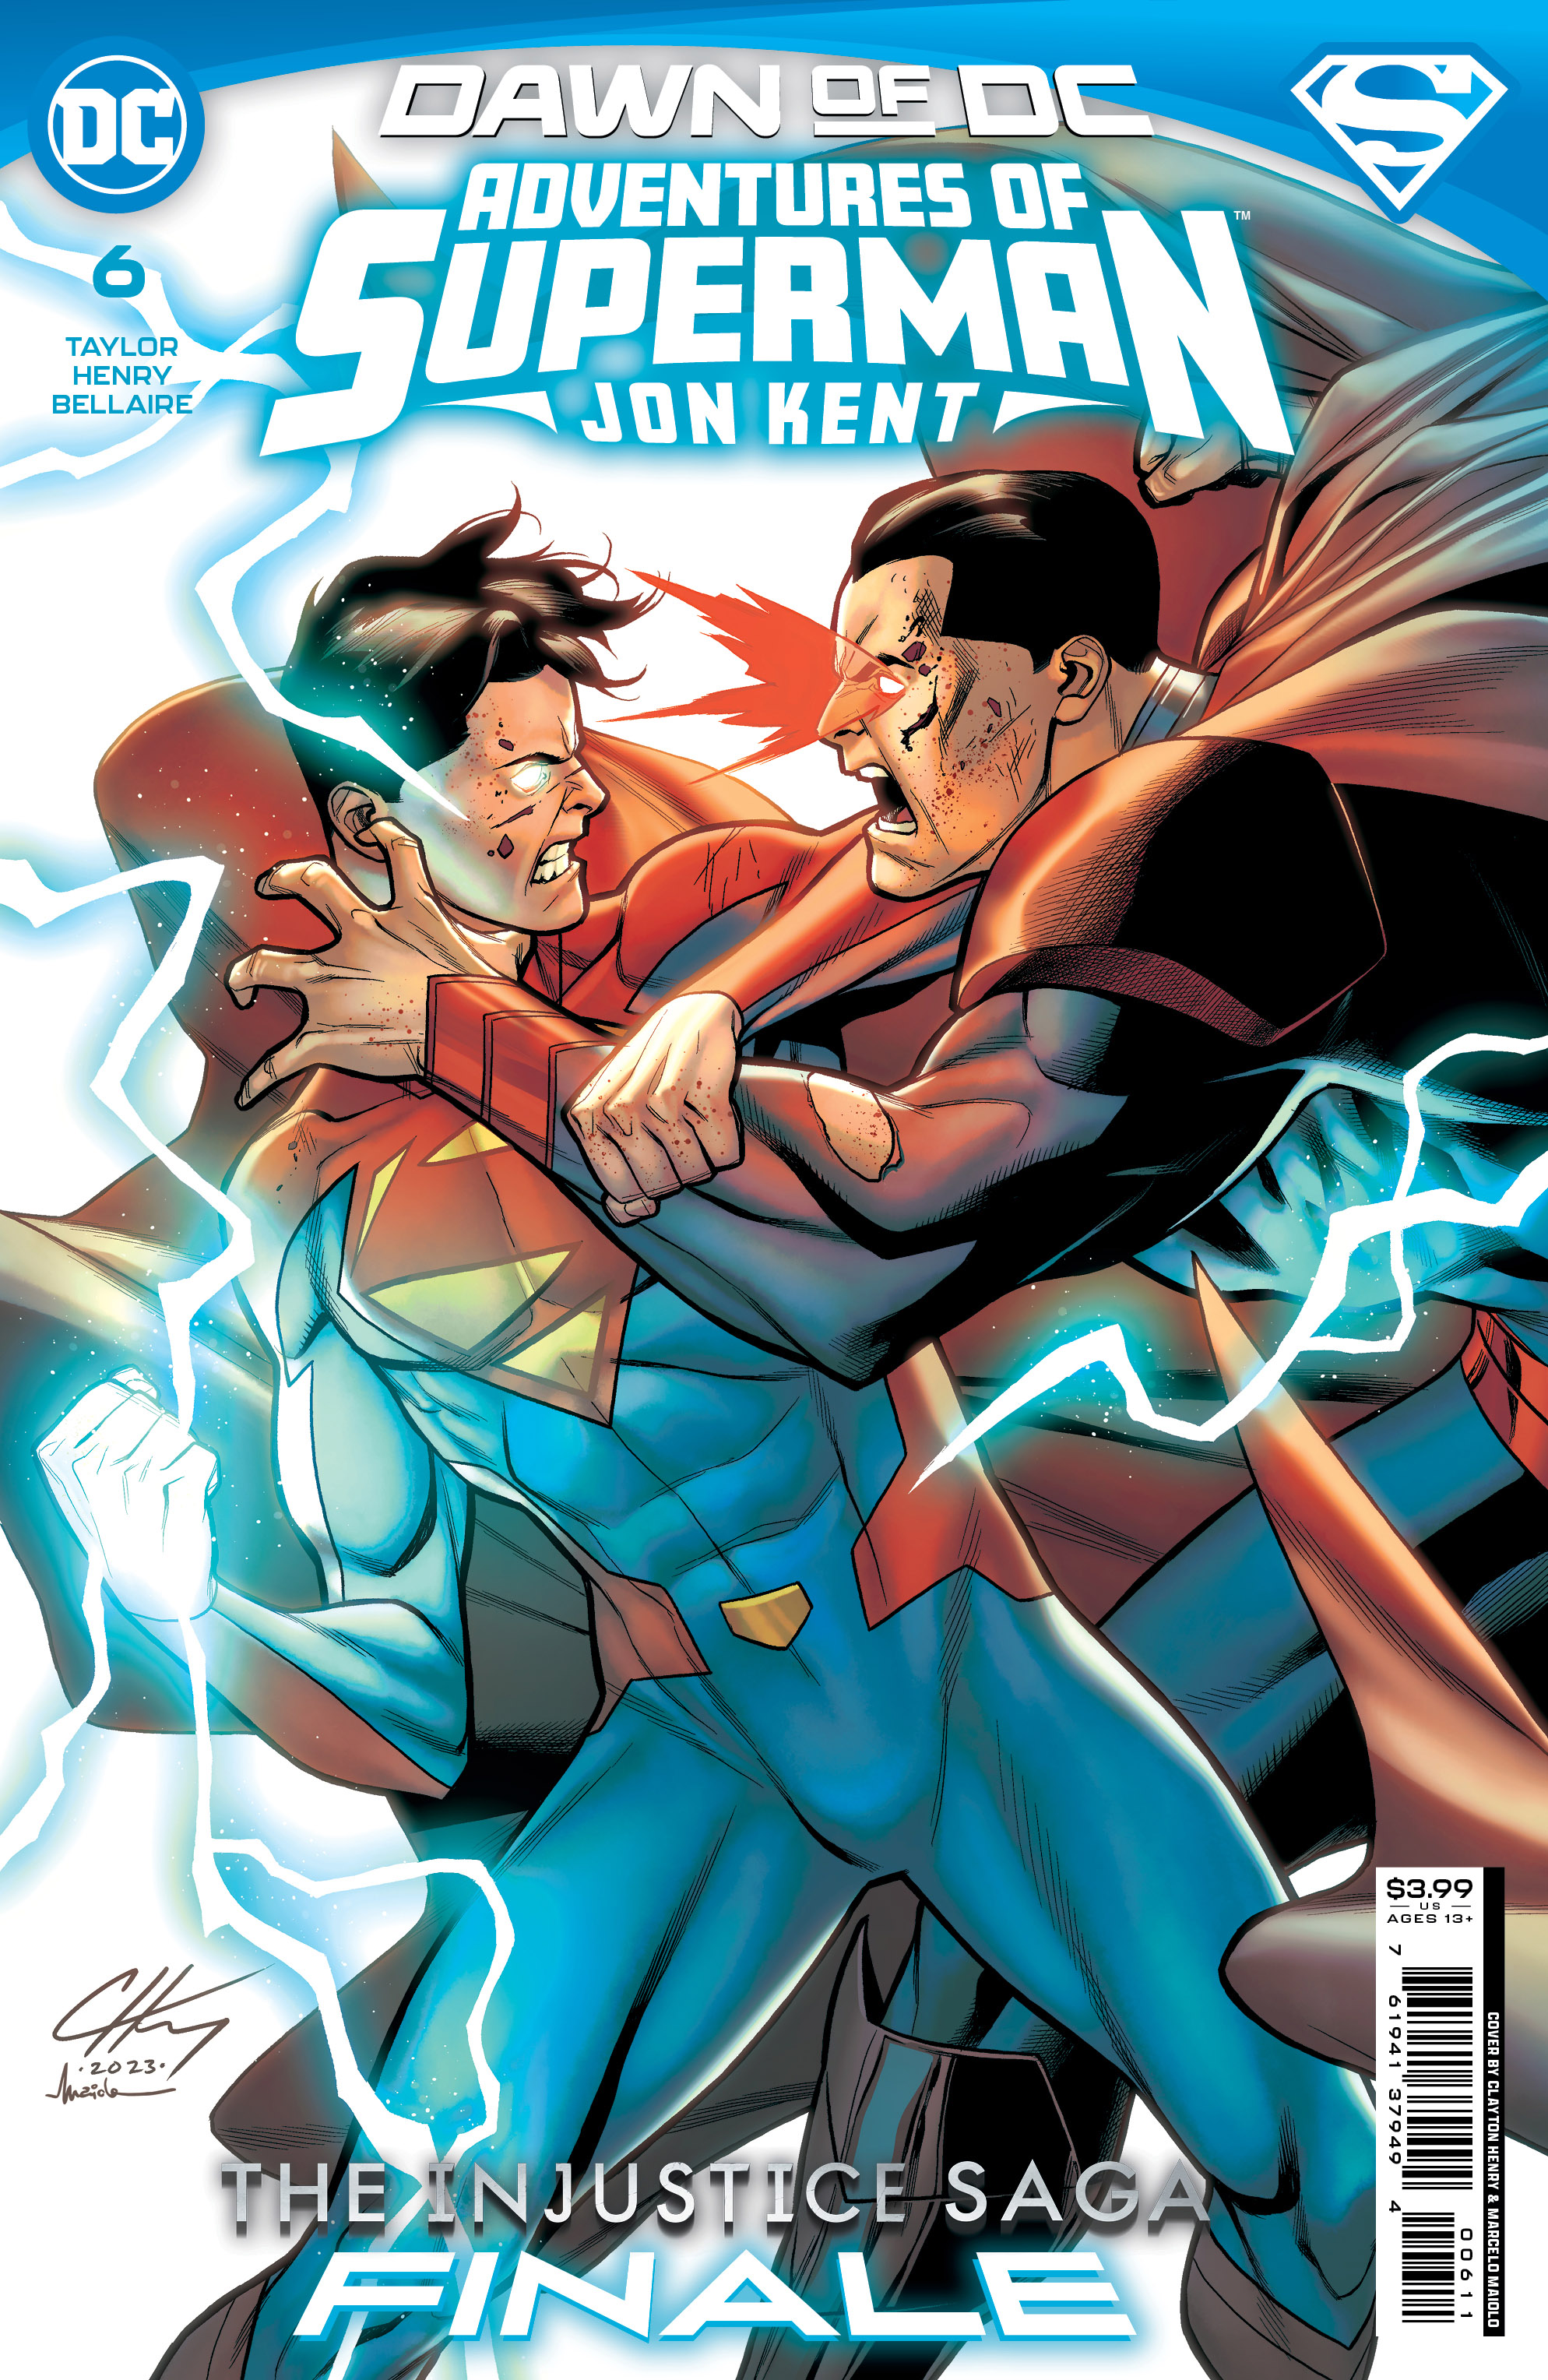 Adventures of Superman Jon Kent #6 Cover A Clayton Henry (Of 6)